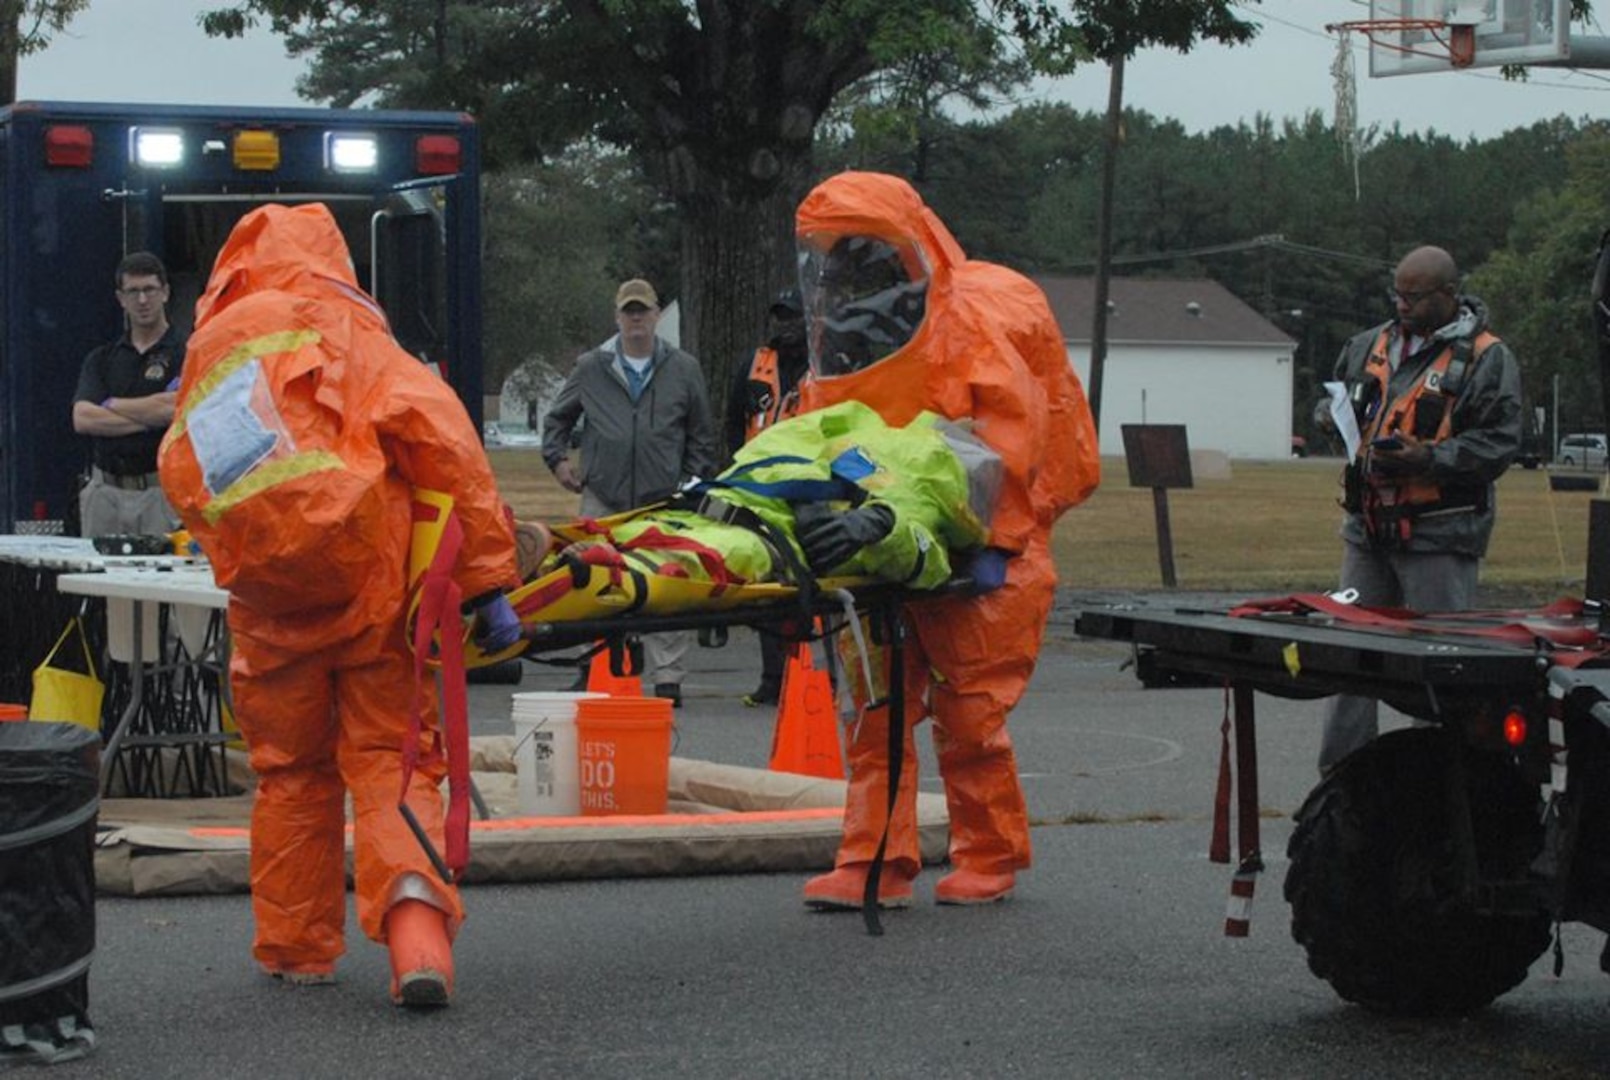 Members of the District of Columbia National Guard’s 33rd Civil Support Team work rescue a simulated victim during recent Training Proficiency Evaluation at Fort Lee in Colonial Heights, Va.